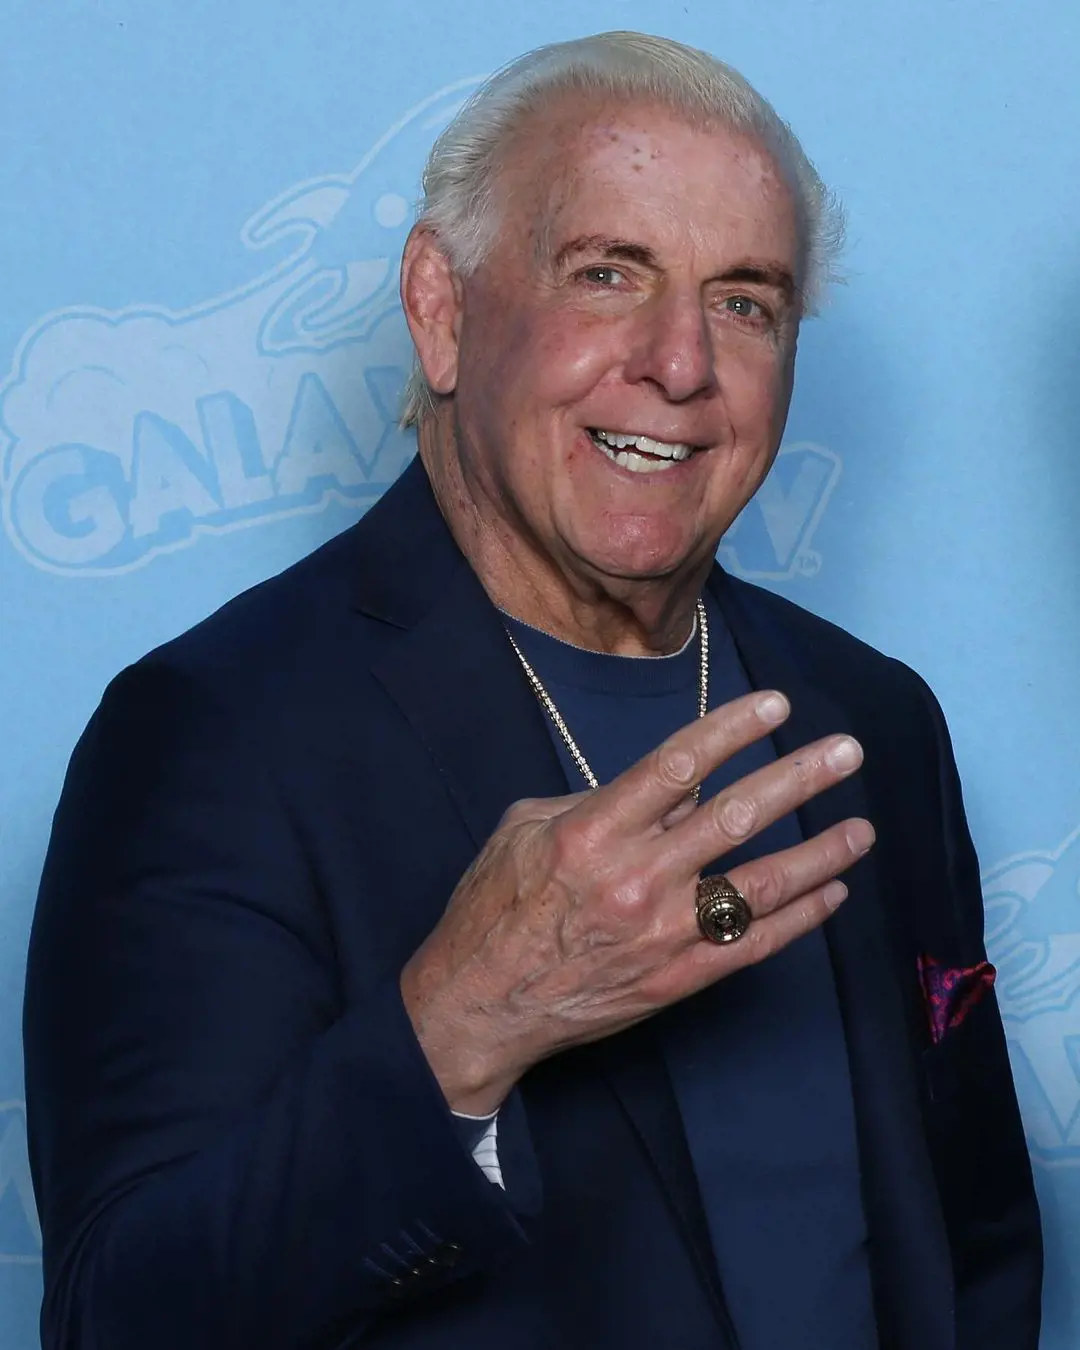 Ric Flair real name is Fred Phillips.